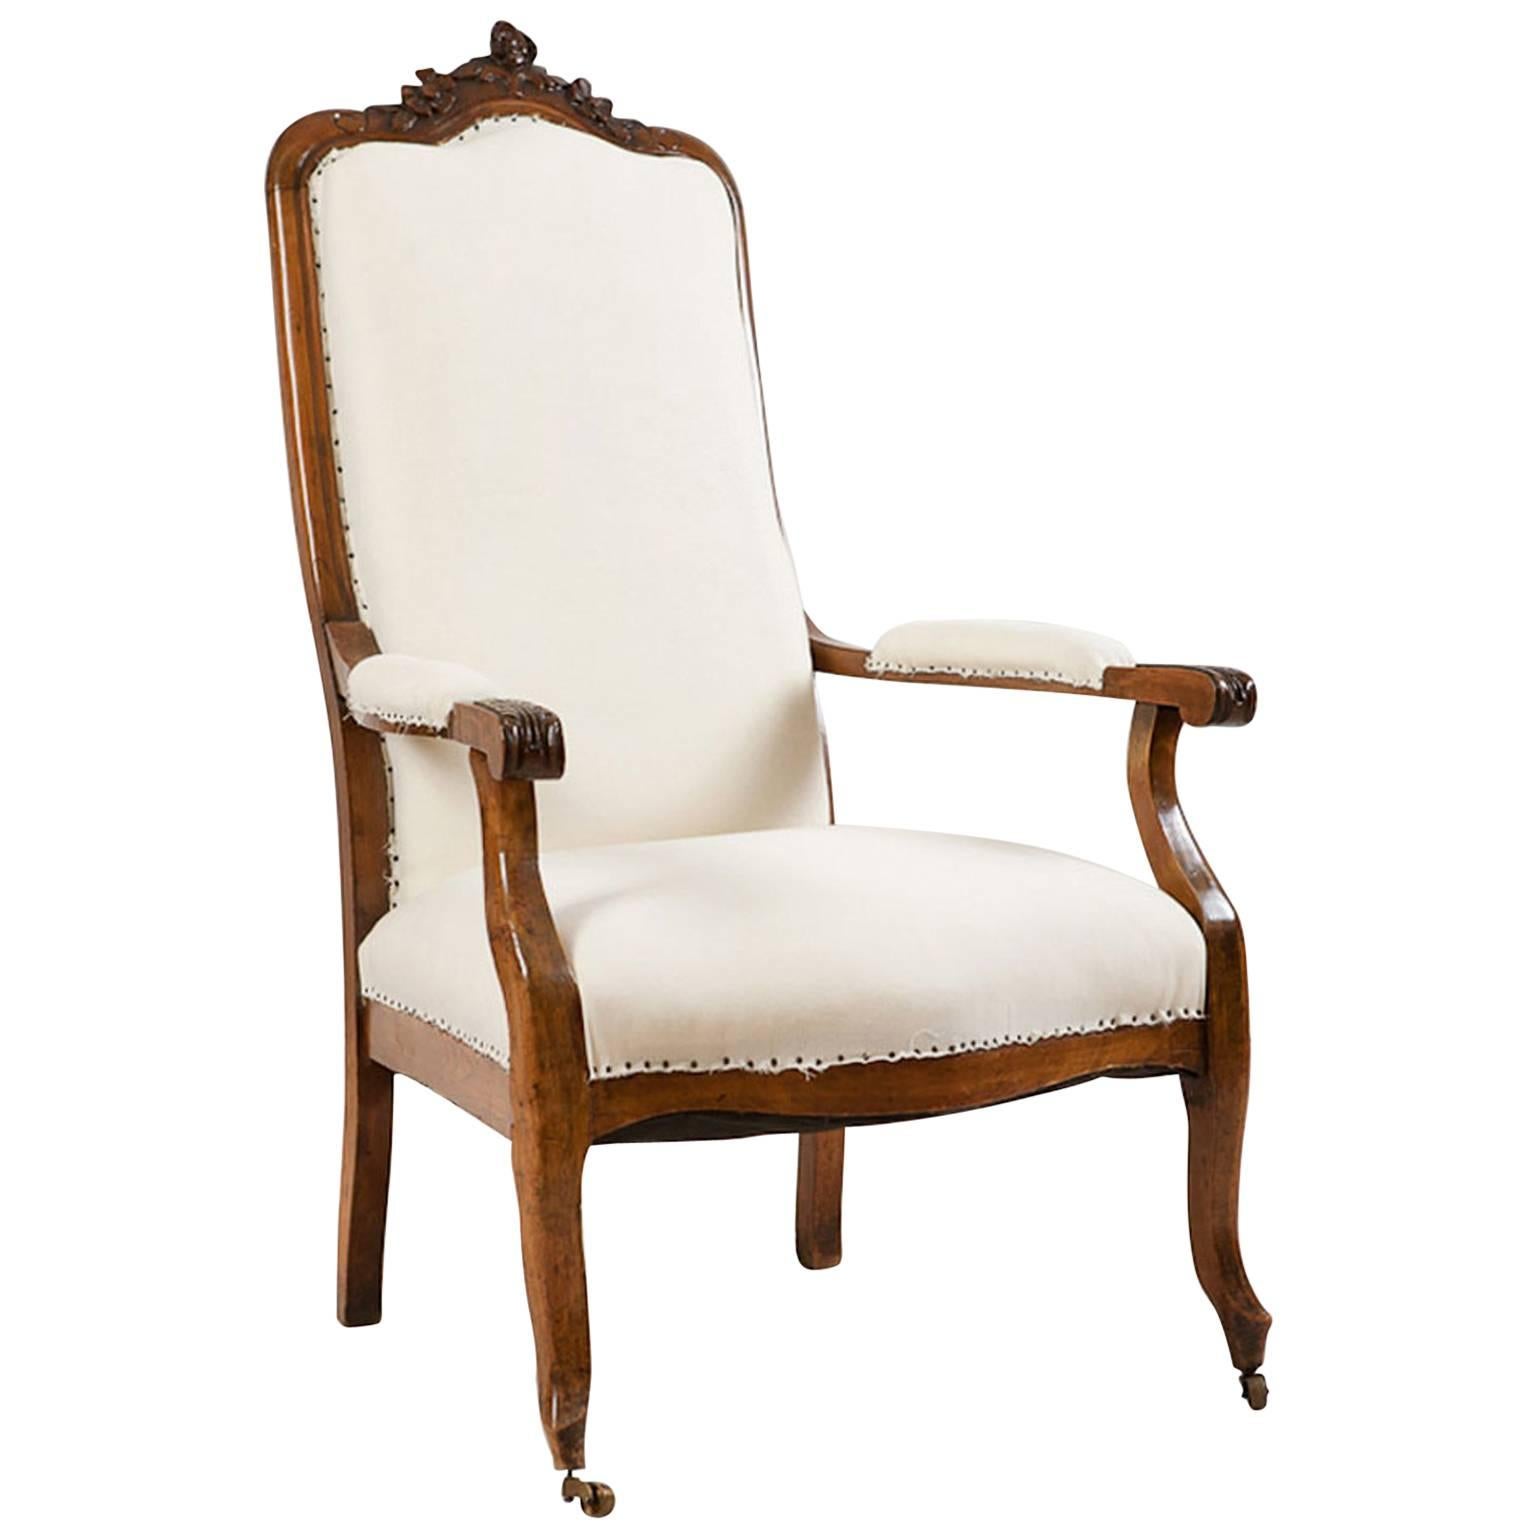 French Napoleon III Fauteuil/ Armchair in Walnut with Upholstery, circa 1870